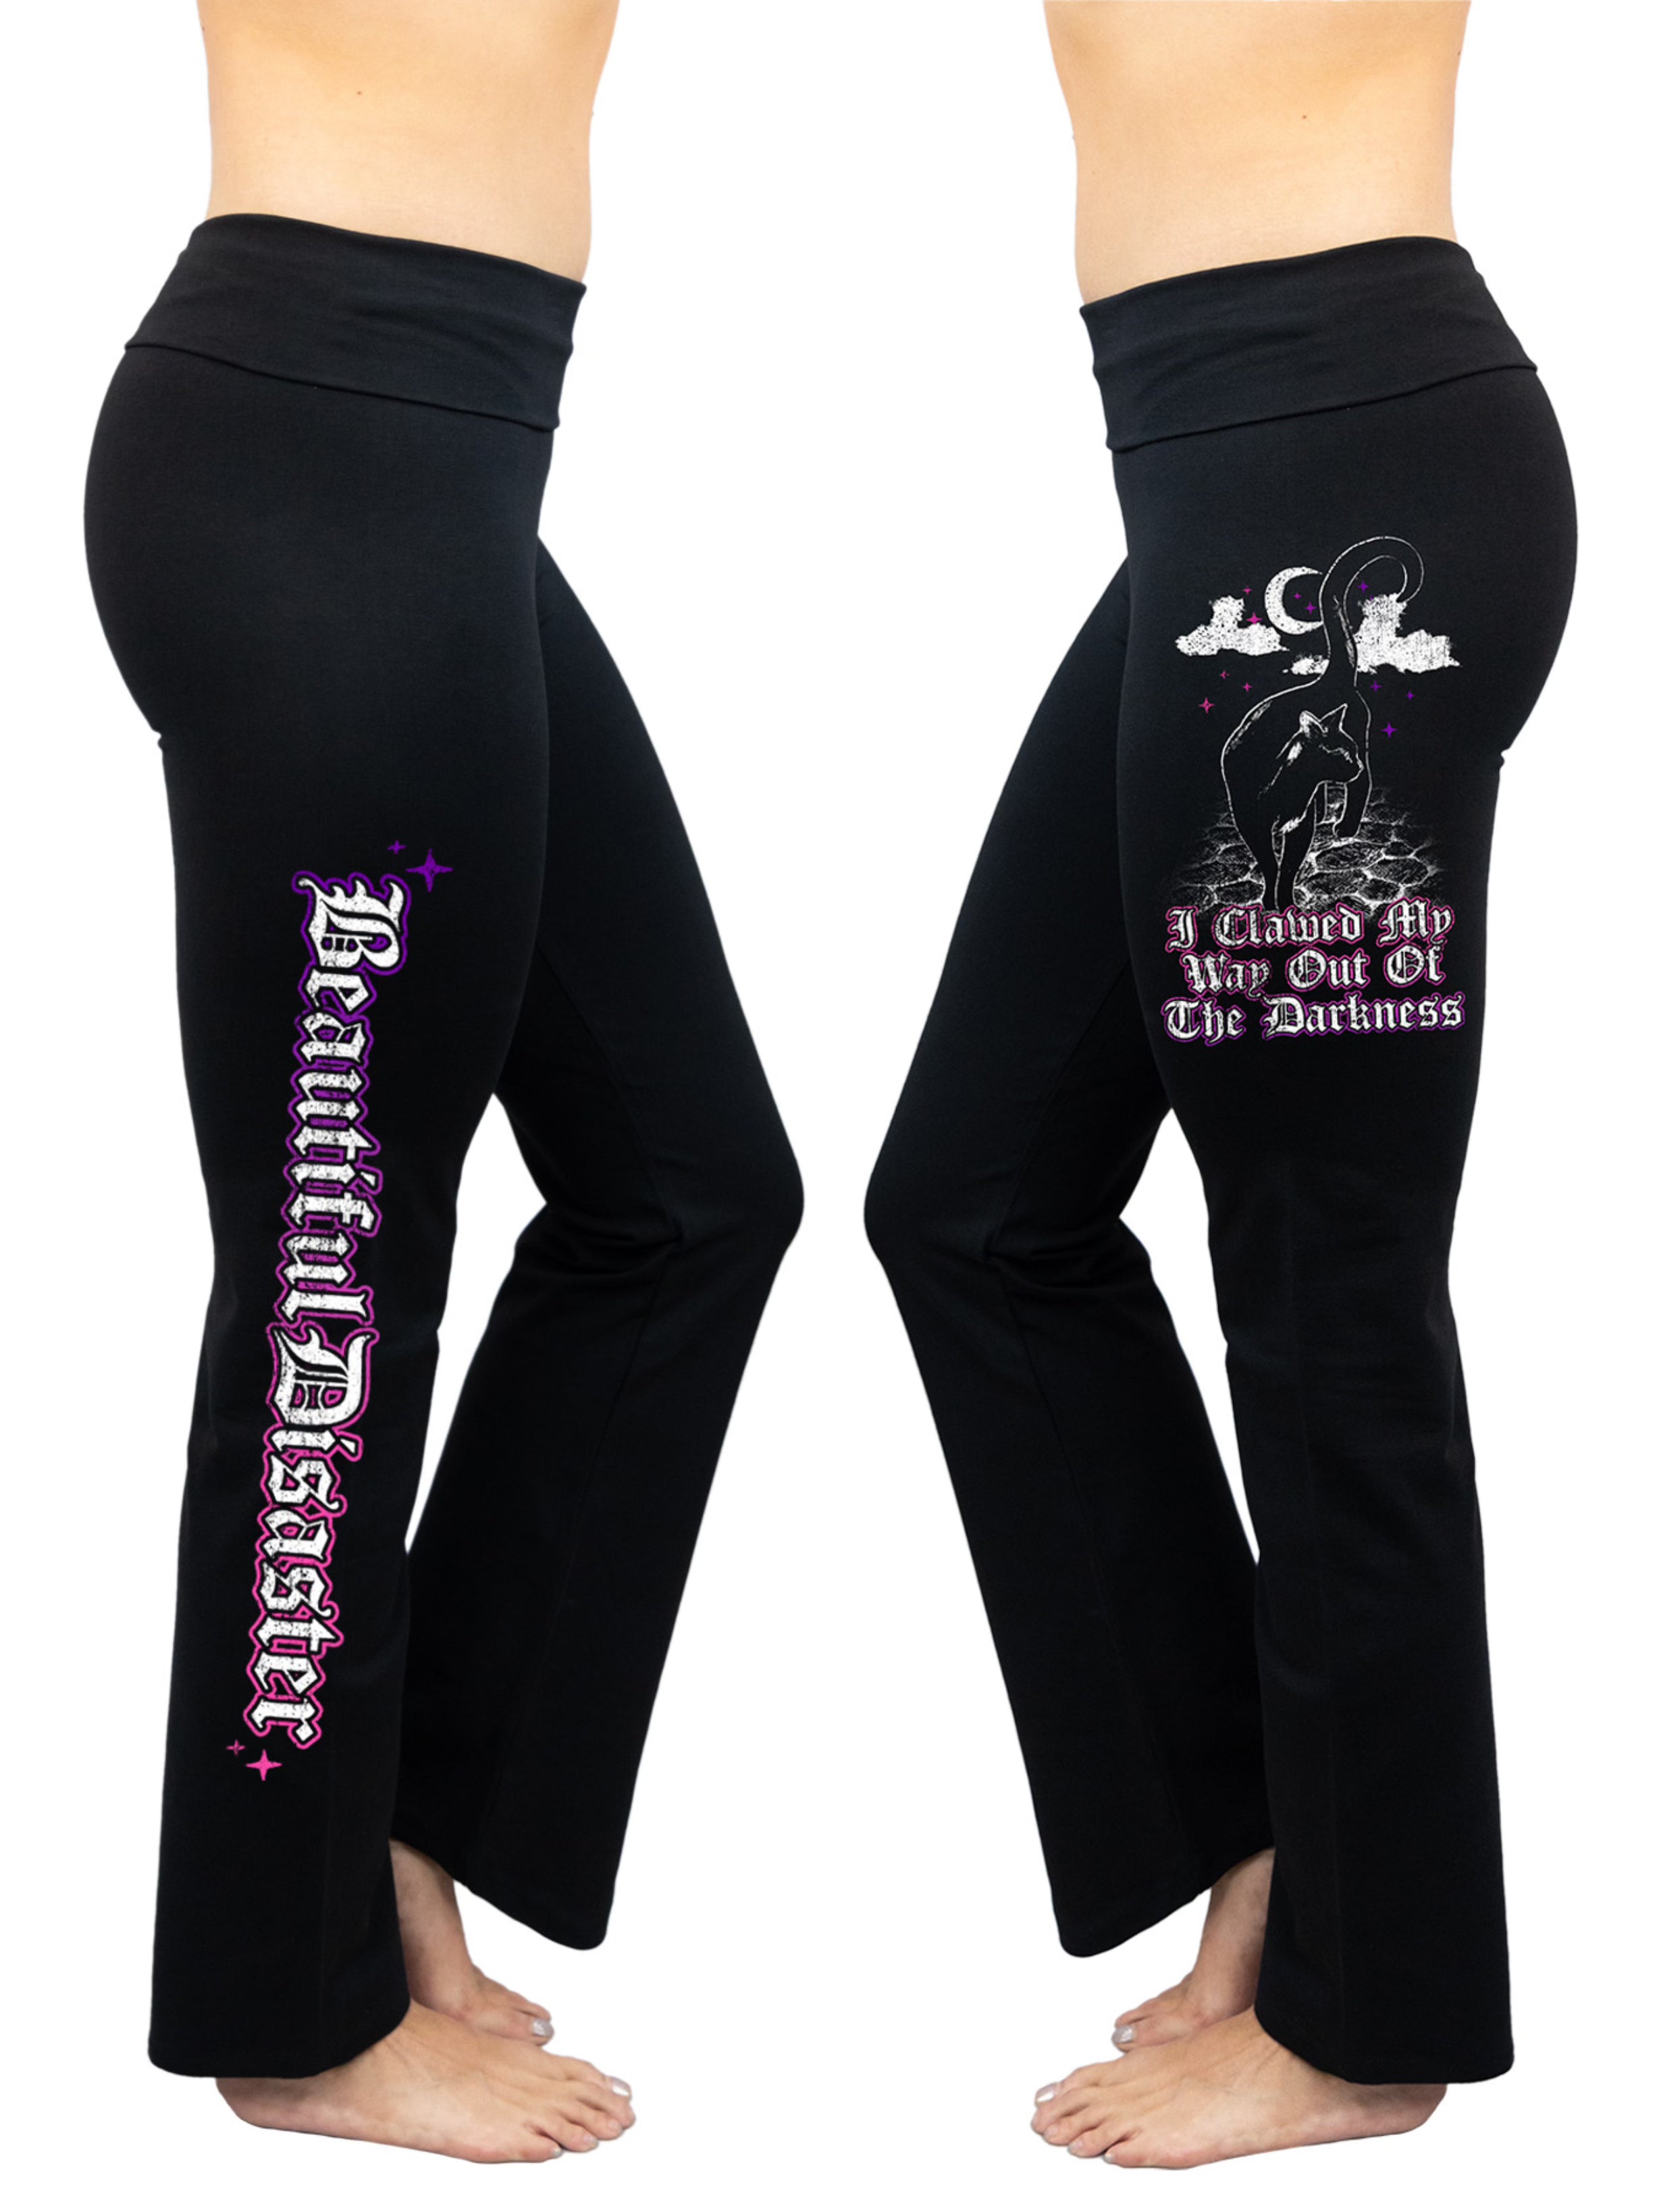 Buddha Pants - Don't get stuck in leggings all summer!☀️ Our